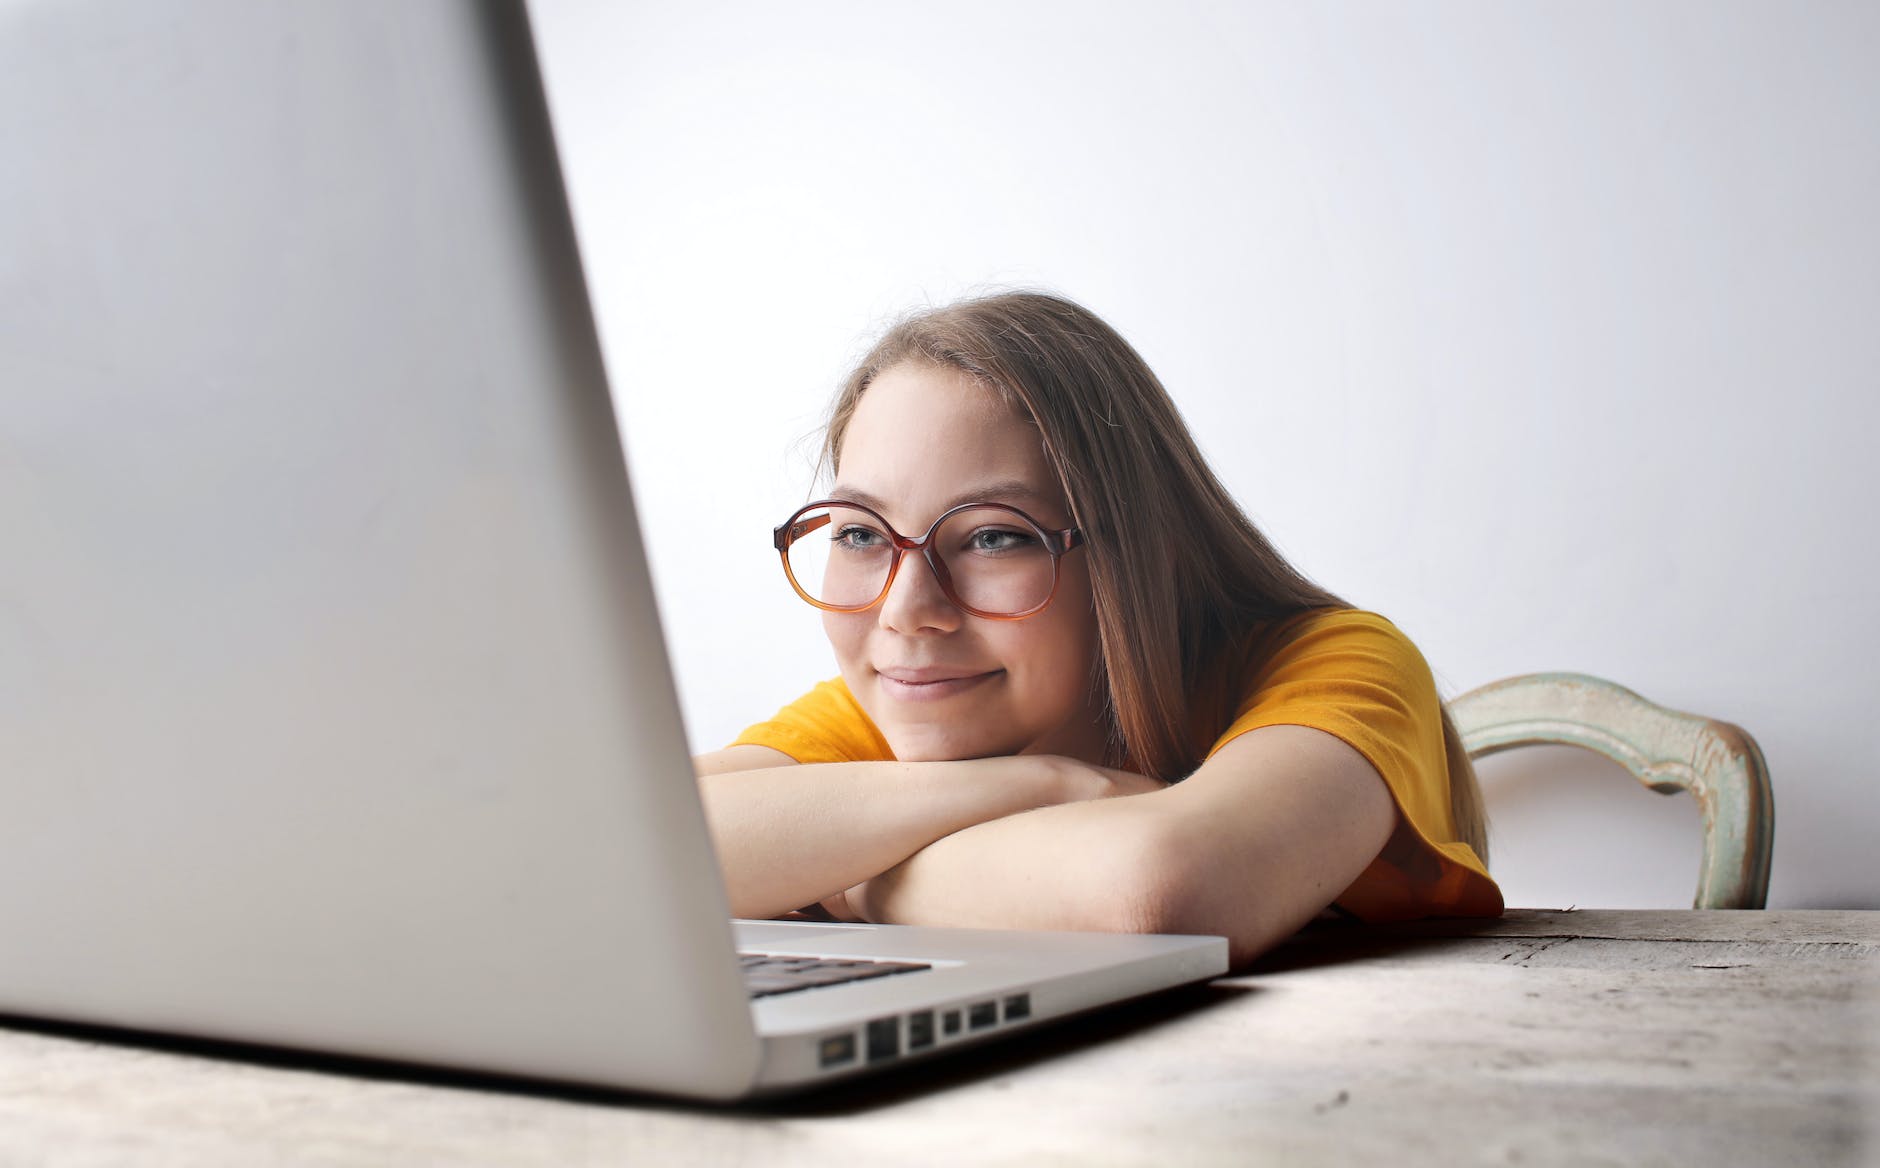 photo of smiling woman in a yellow shirt watching her laptop